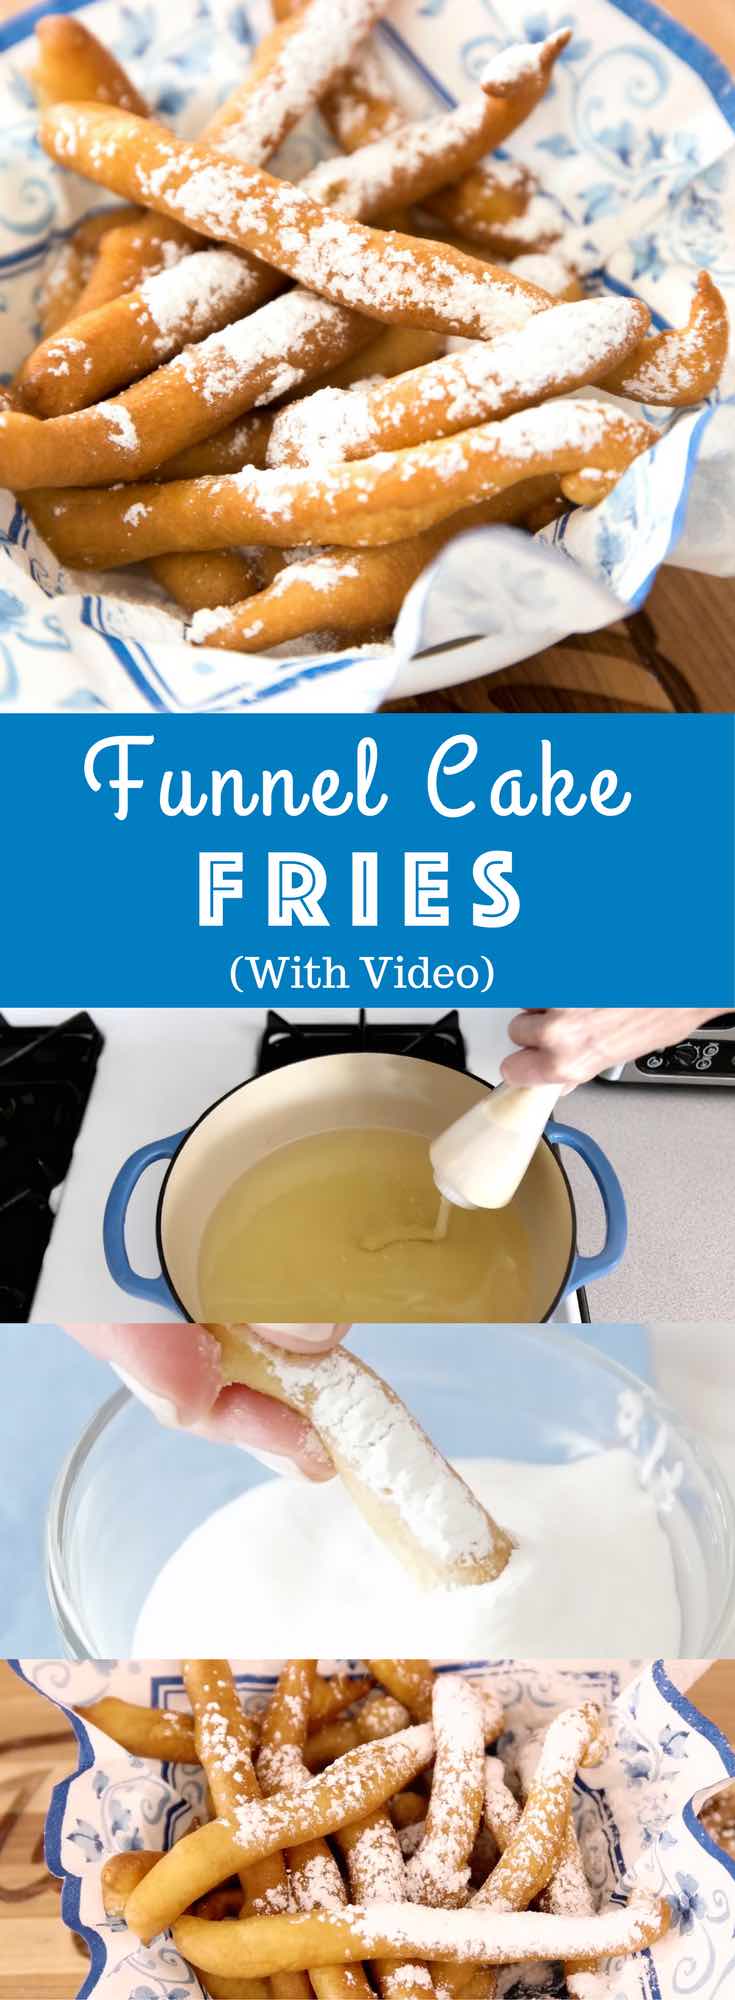 Funnel Cake Fries are golden on the outside and fluffy inside. Skip the State Fair and make these funnel fries for a party and dip them in caramel sauce or marshmallow fluff. Ready in just 20 minutes with no baking required #funnelcakefries #funnelfries